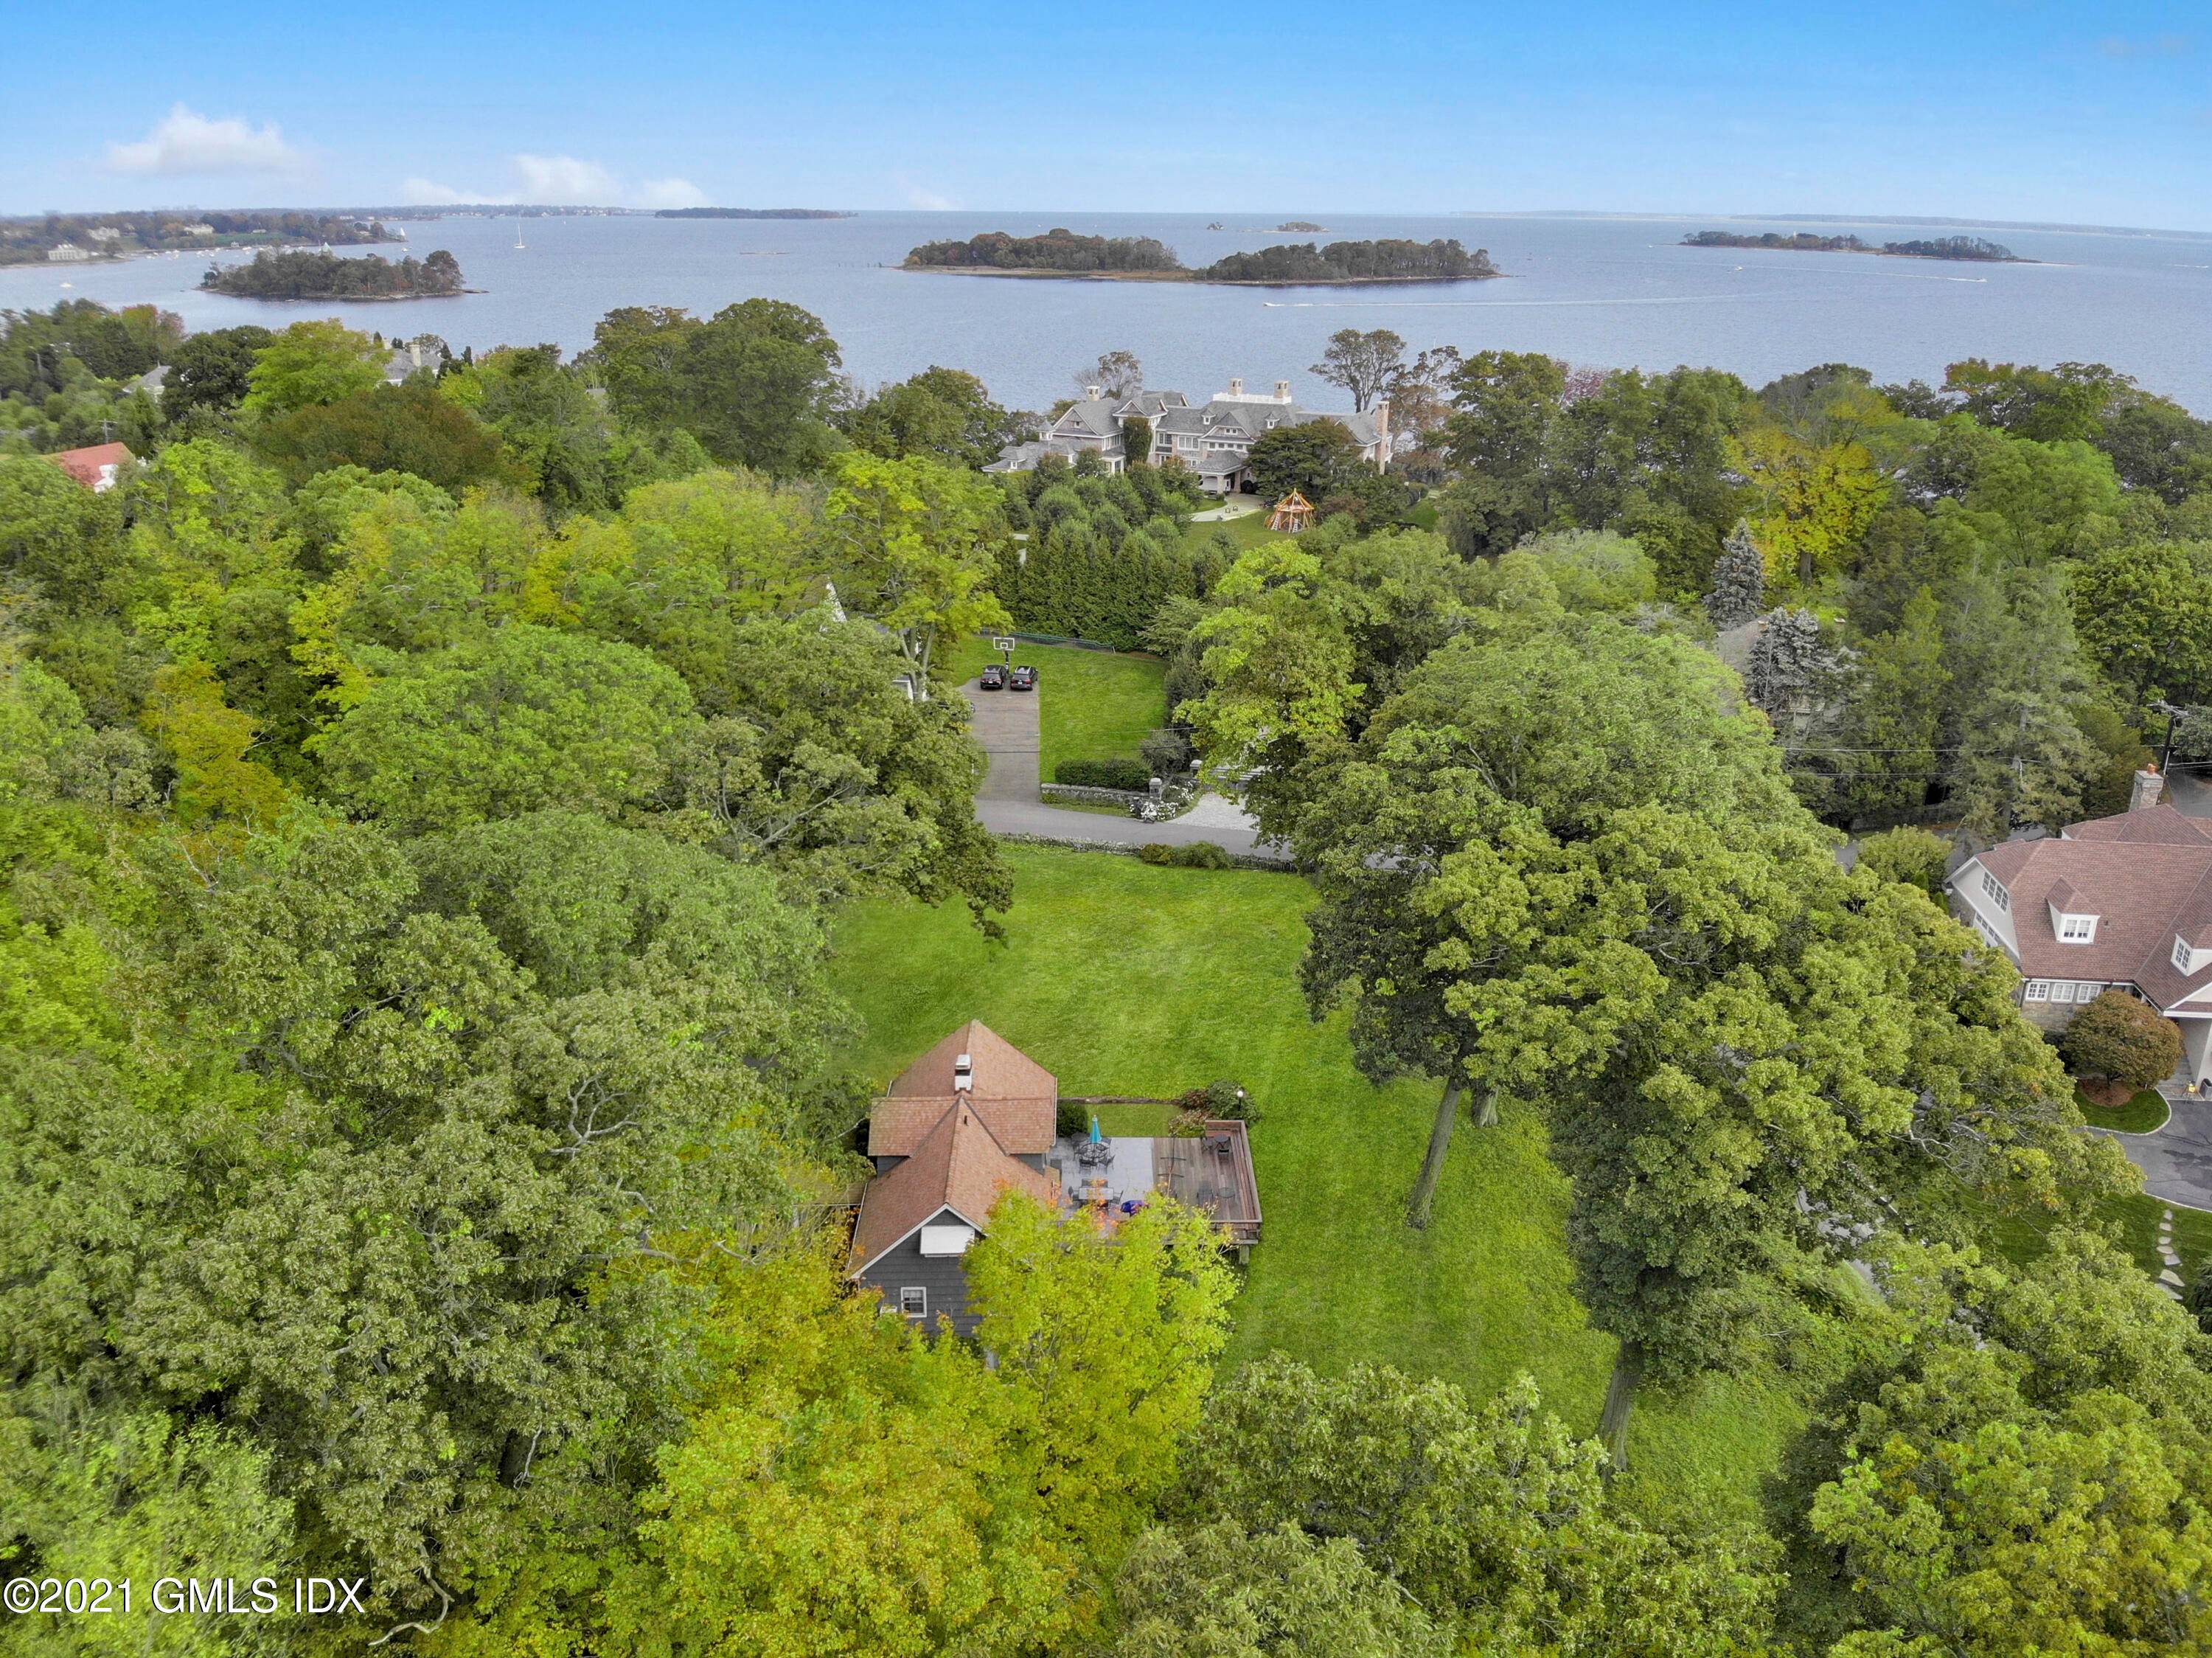 Waterfront lot on prestigious Byram Shore Road with deeded beach rights to Hawthorne Beach Association.